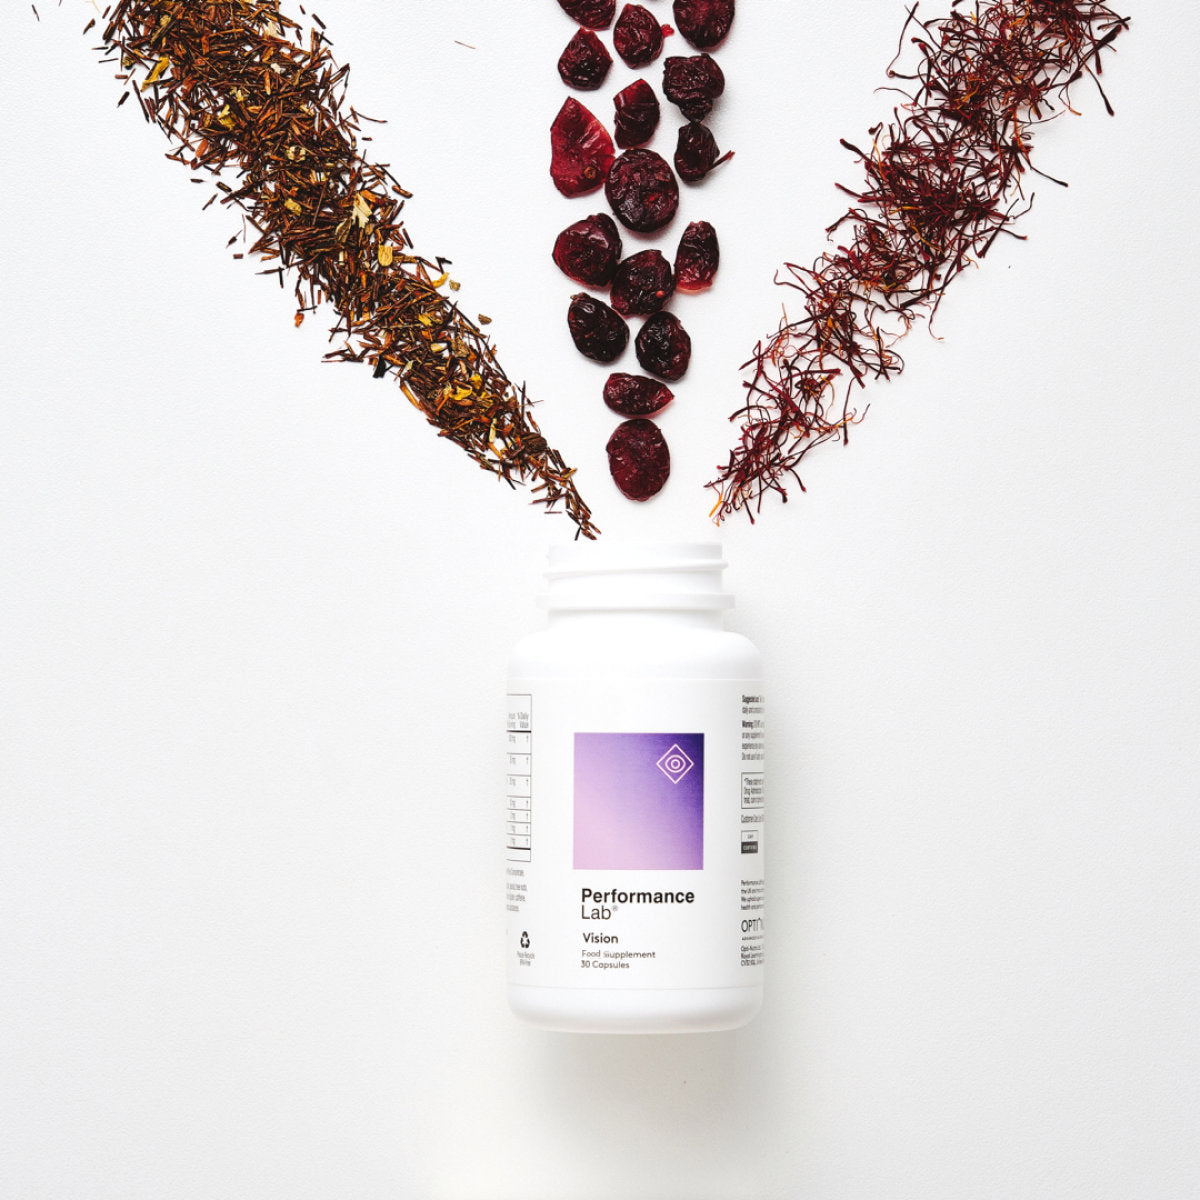 image of Performance Lab® Vision bottle and ingredients